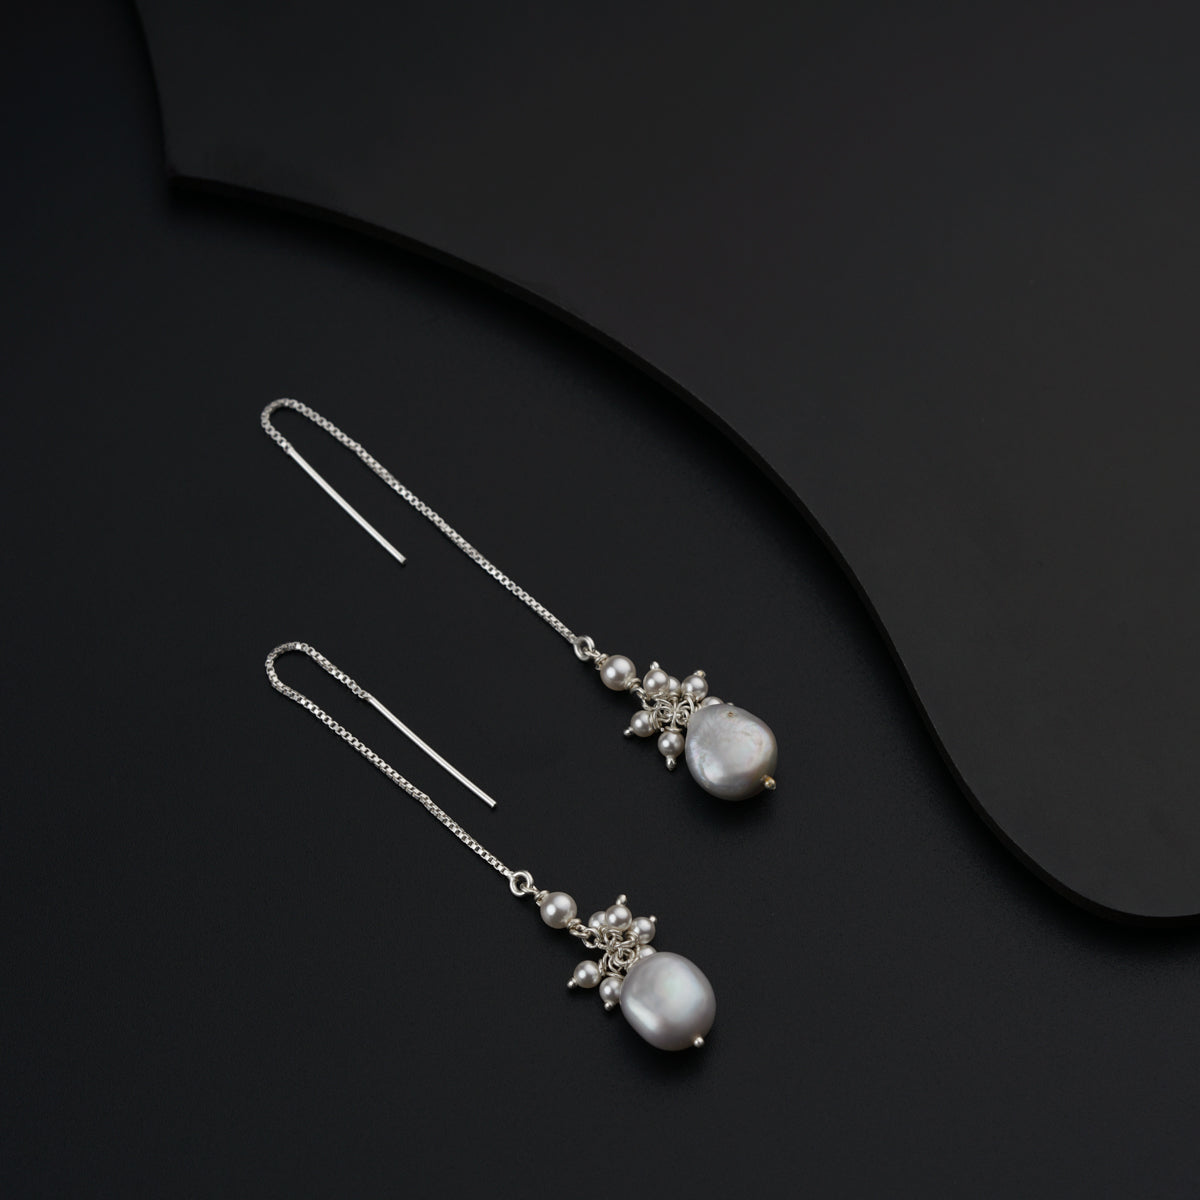 a pair of pearl and crystal earrings on a black surface